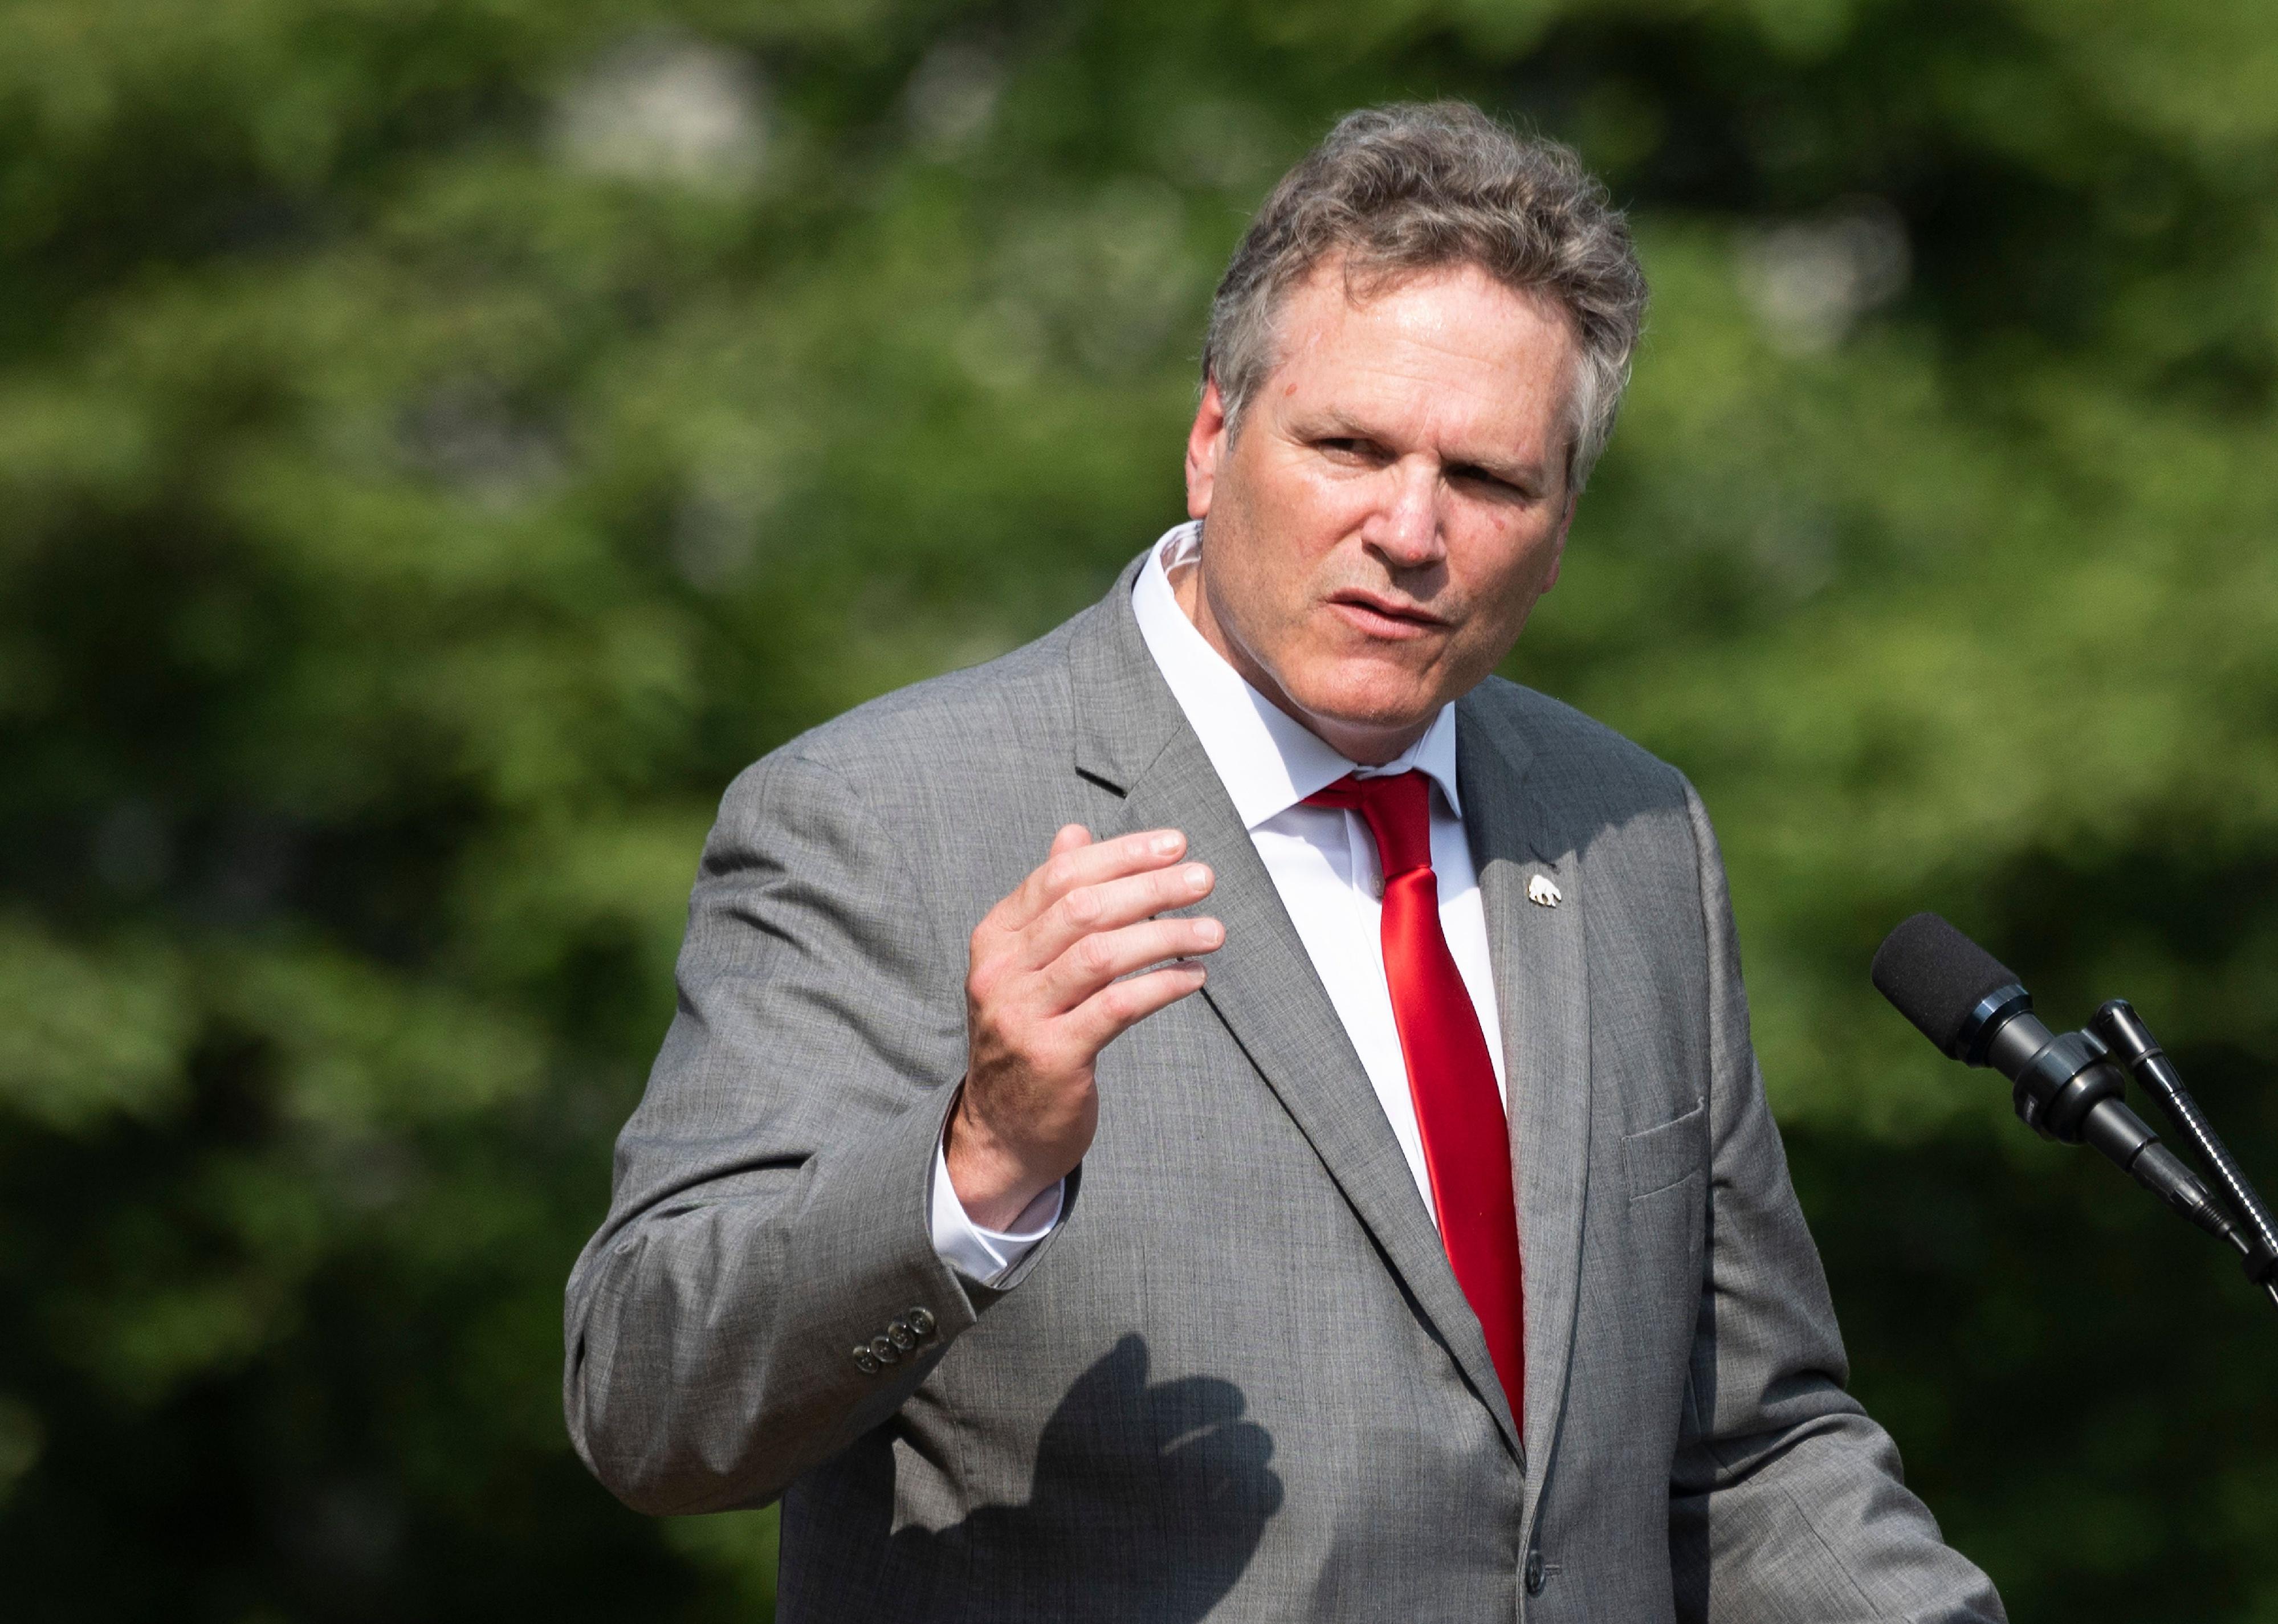 Alaska Governor Mike Dunleavy speaks at the White House